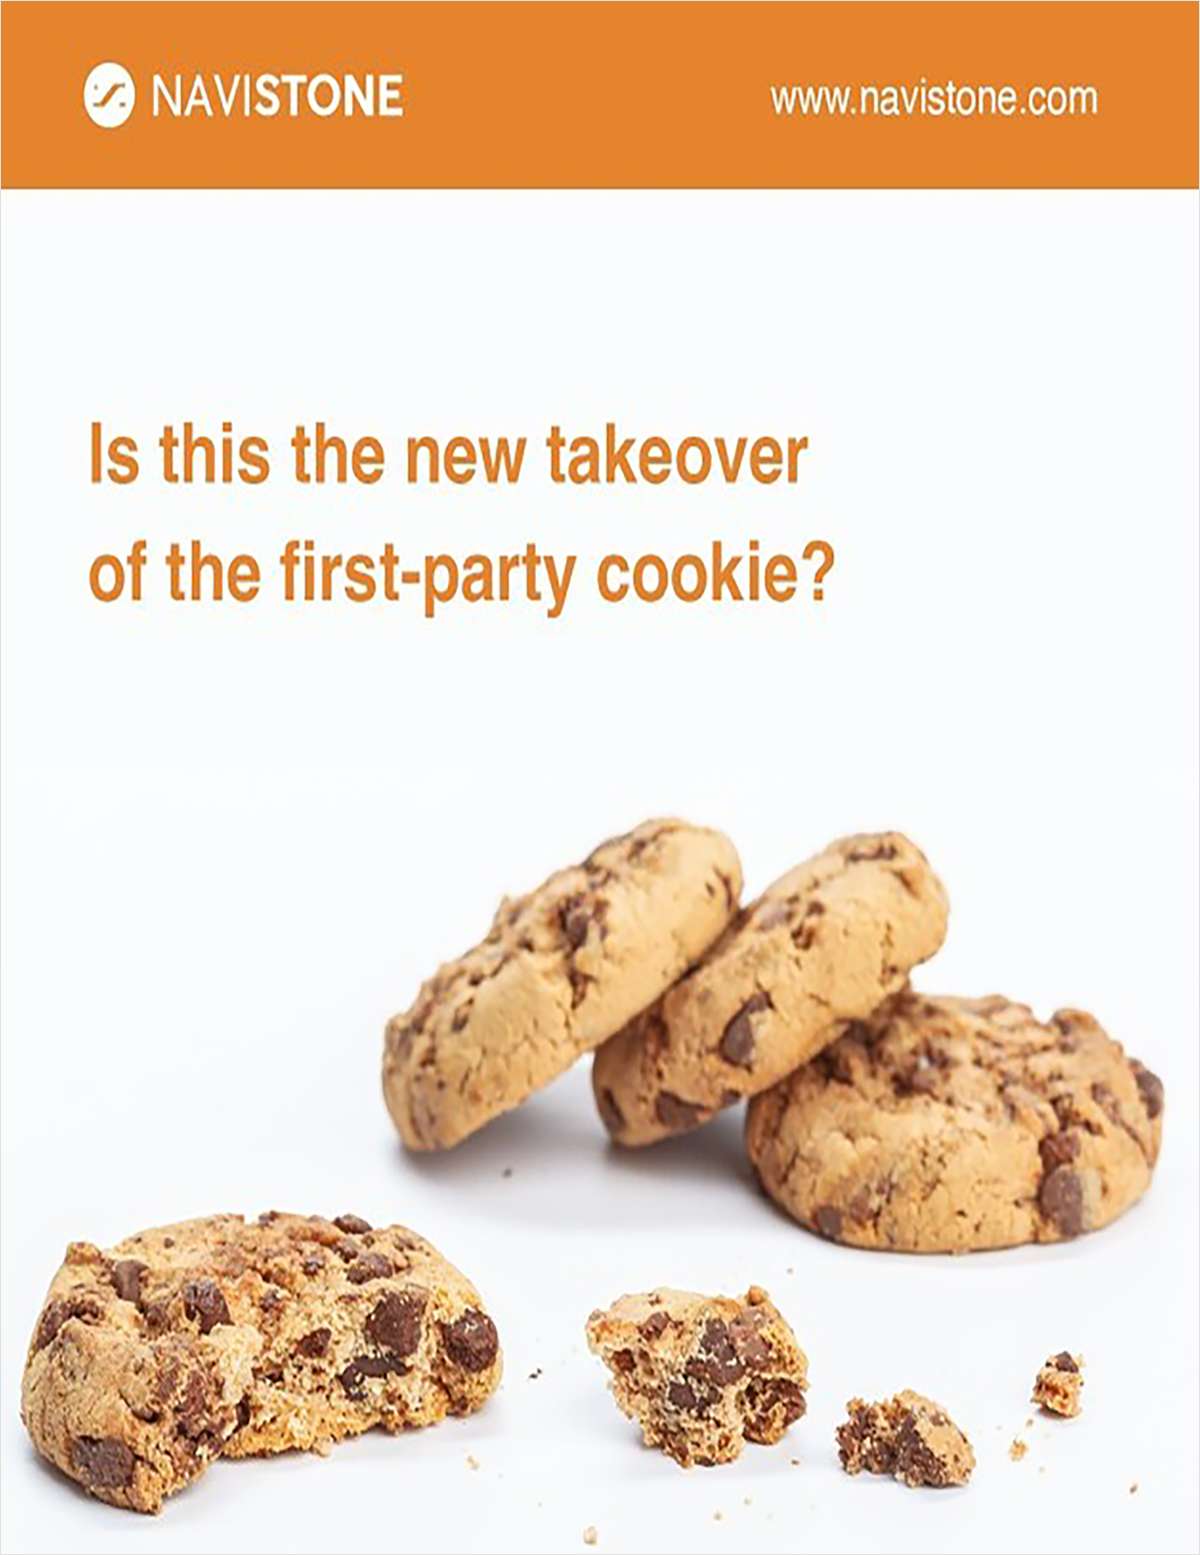 Retargeting Without Third Party Cookies